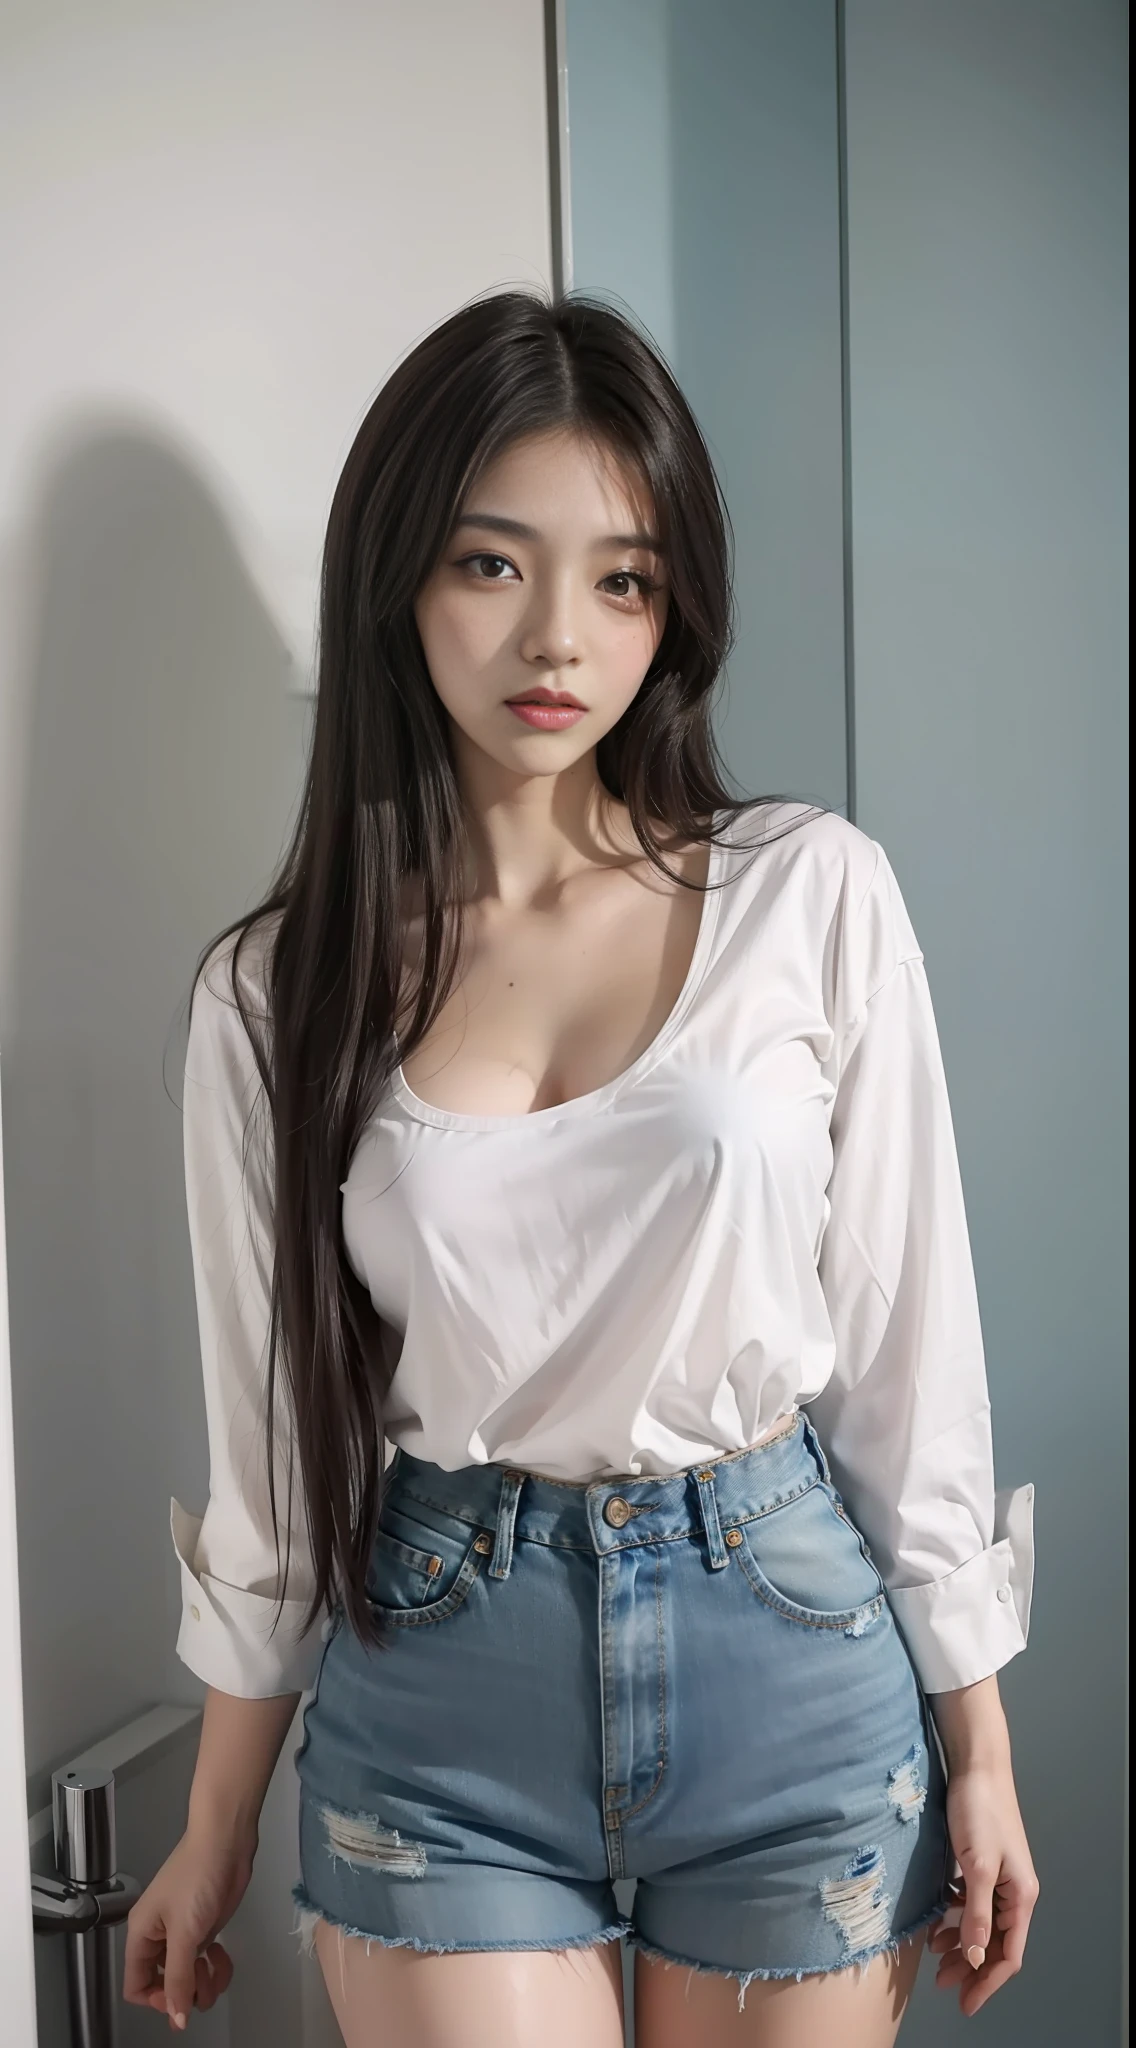 Araki woman in bathroom, sexy, white western shirt, sexy shirt, skinny, jeans, shorts, 2 2 years old, thicc, she is about 26 years old, height 170 cm, Korean, delicate face, realistic, japanese goddess,